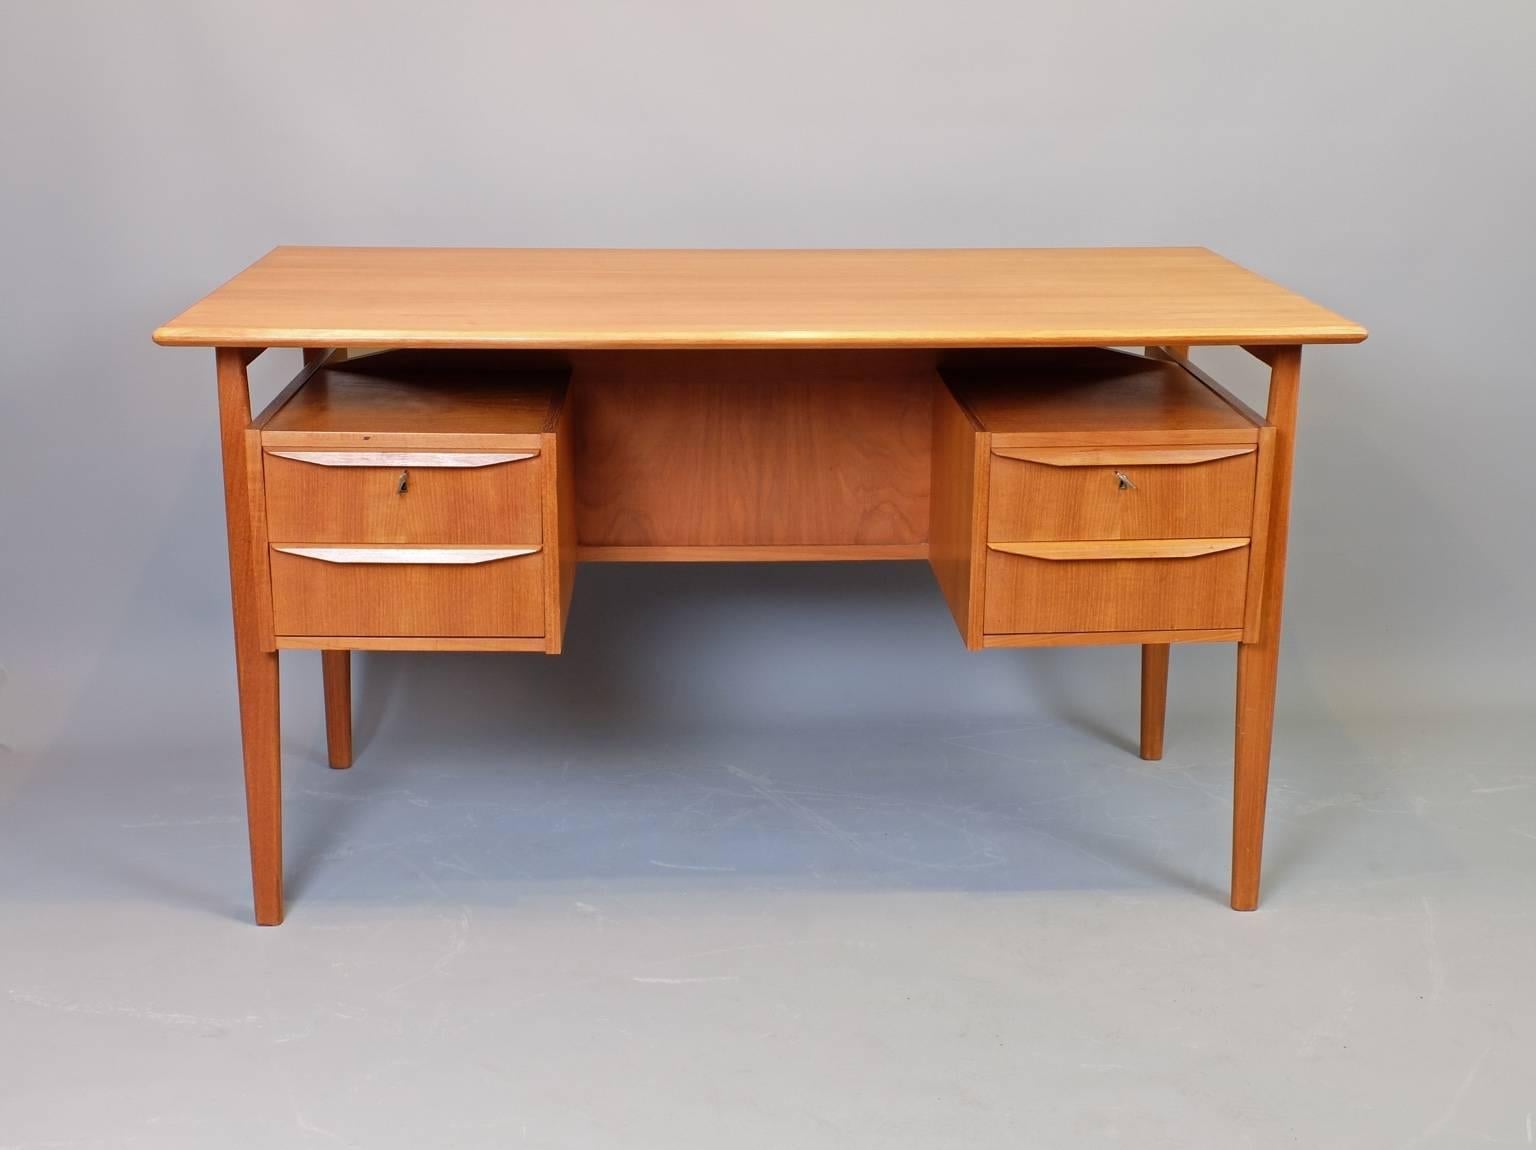 A golden teak floating top desk by G Tibergaard, Denmark, circa 1960. Two locking drawers with original and working keys. Features a useful and decorative bookshelf at the back. The kneehole opening measures 17.75